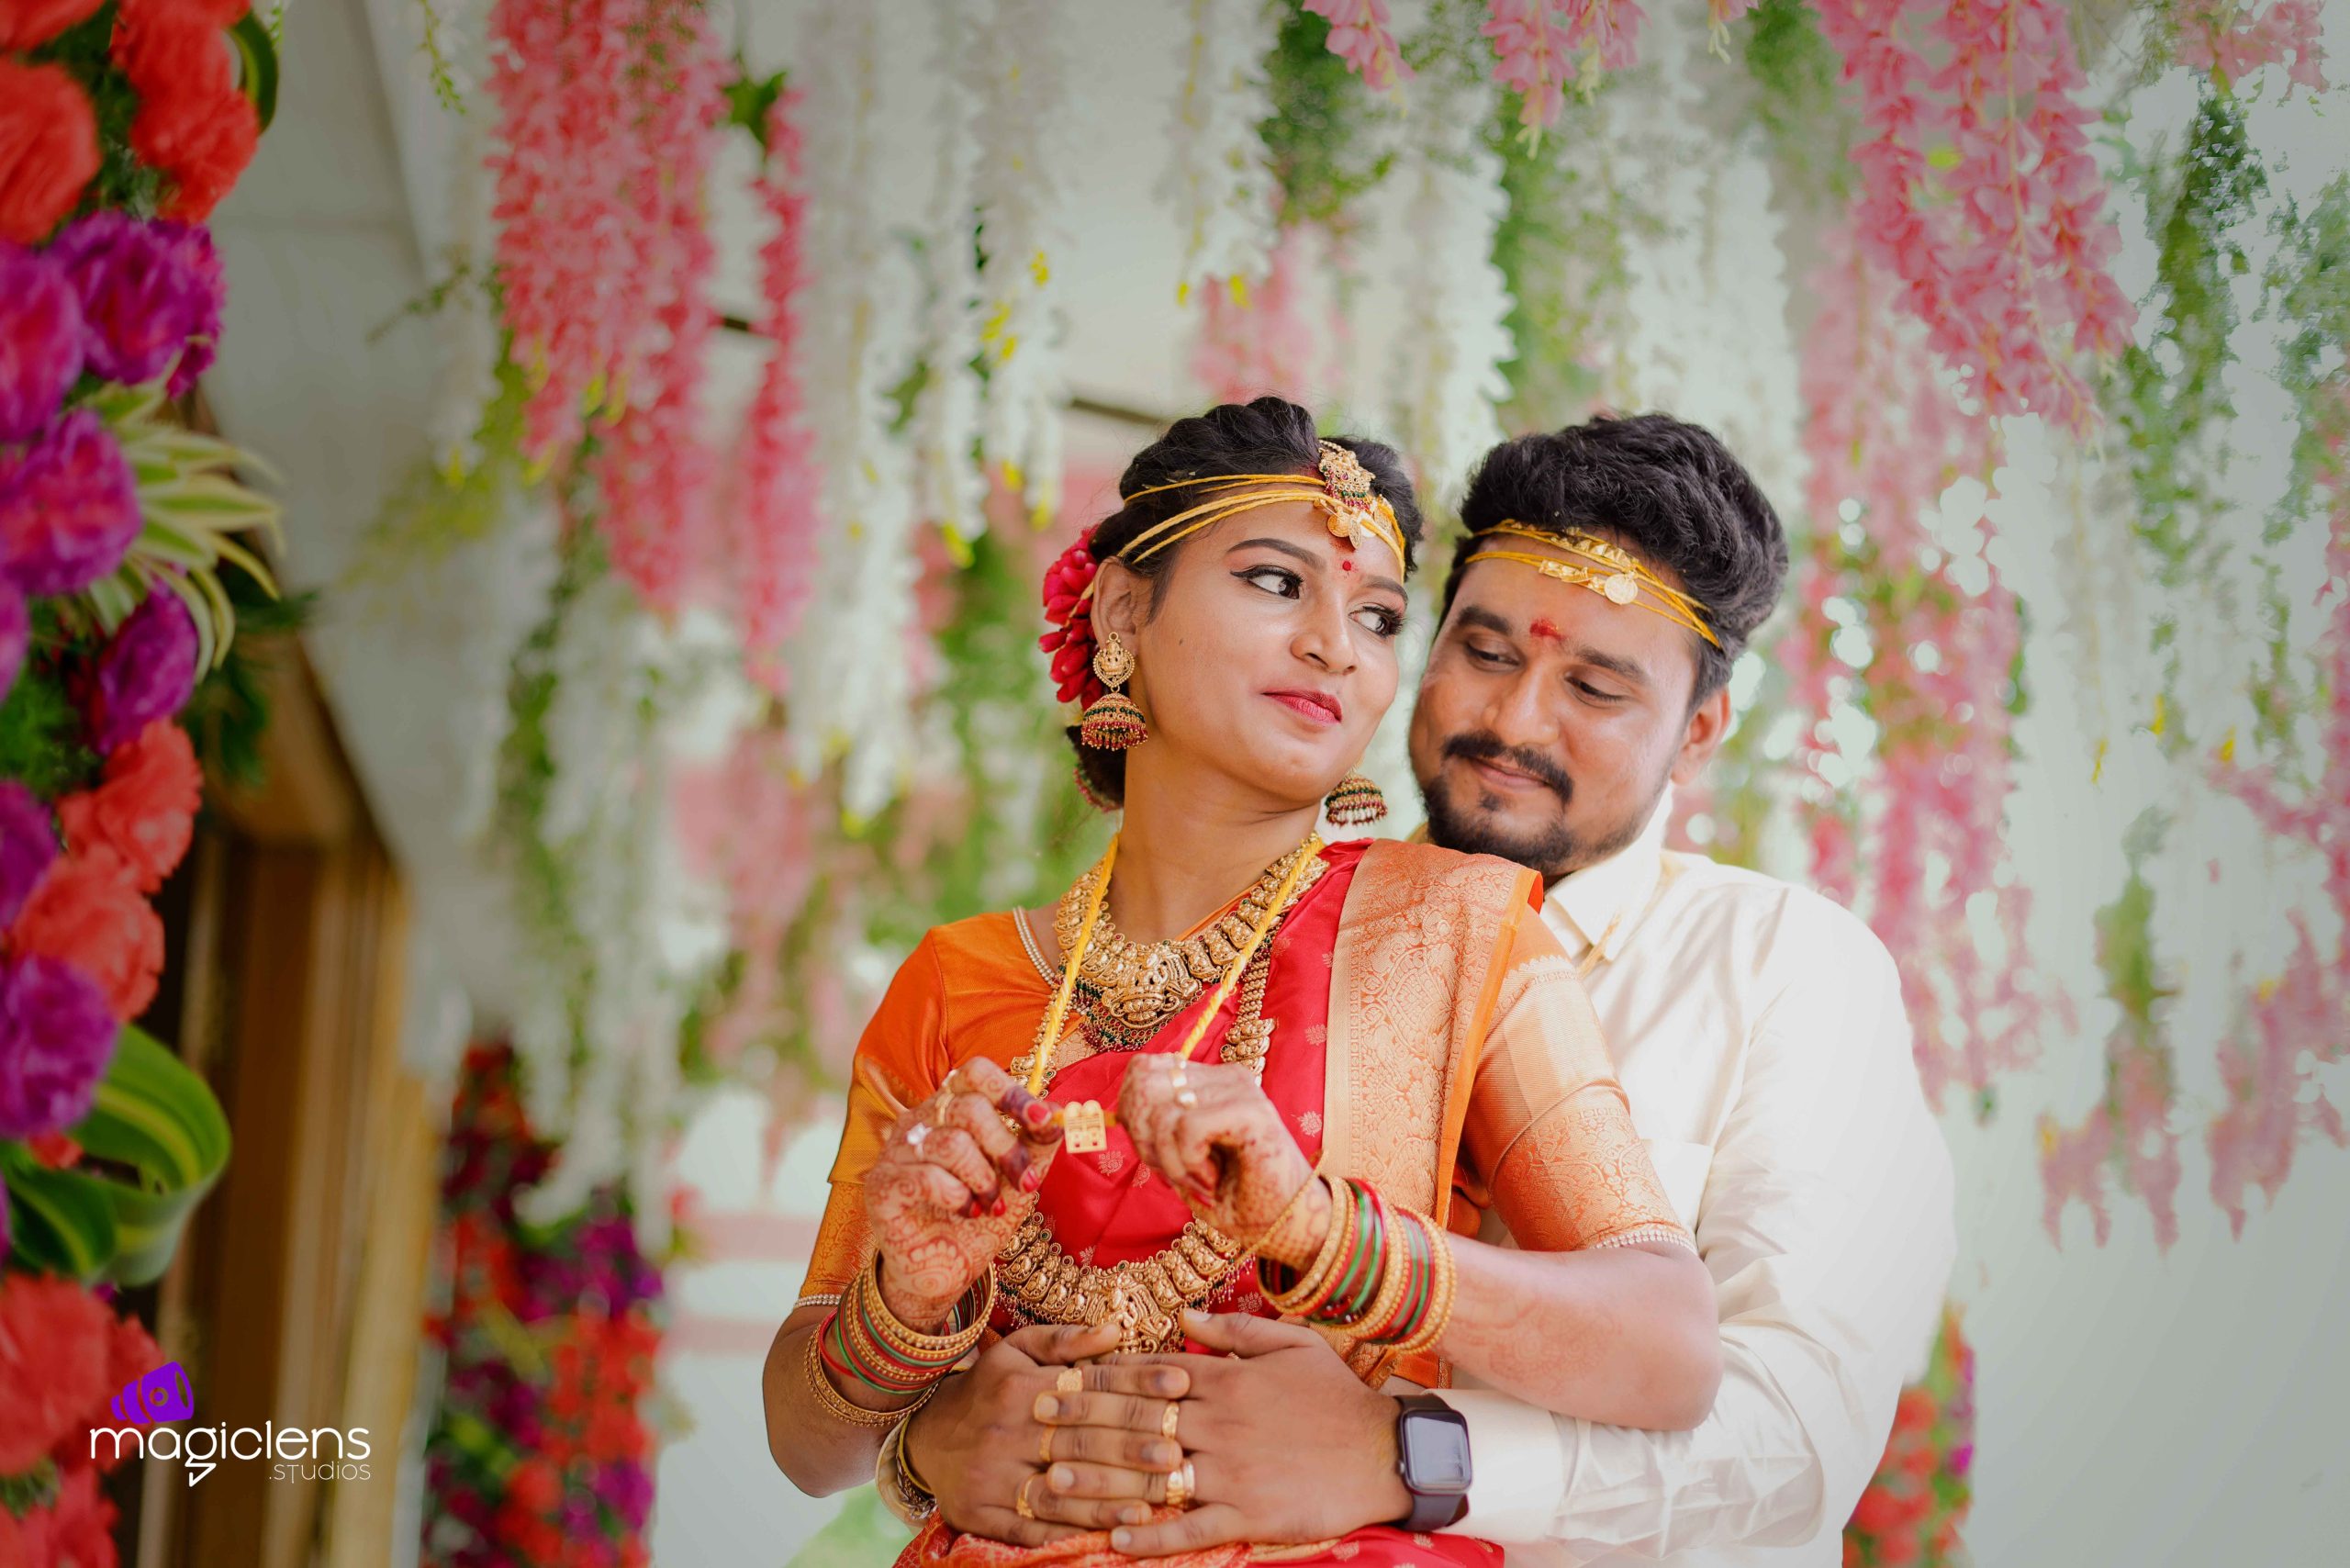 Giving back & charitable donations to celebrate weddings - GiveIndia Blog